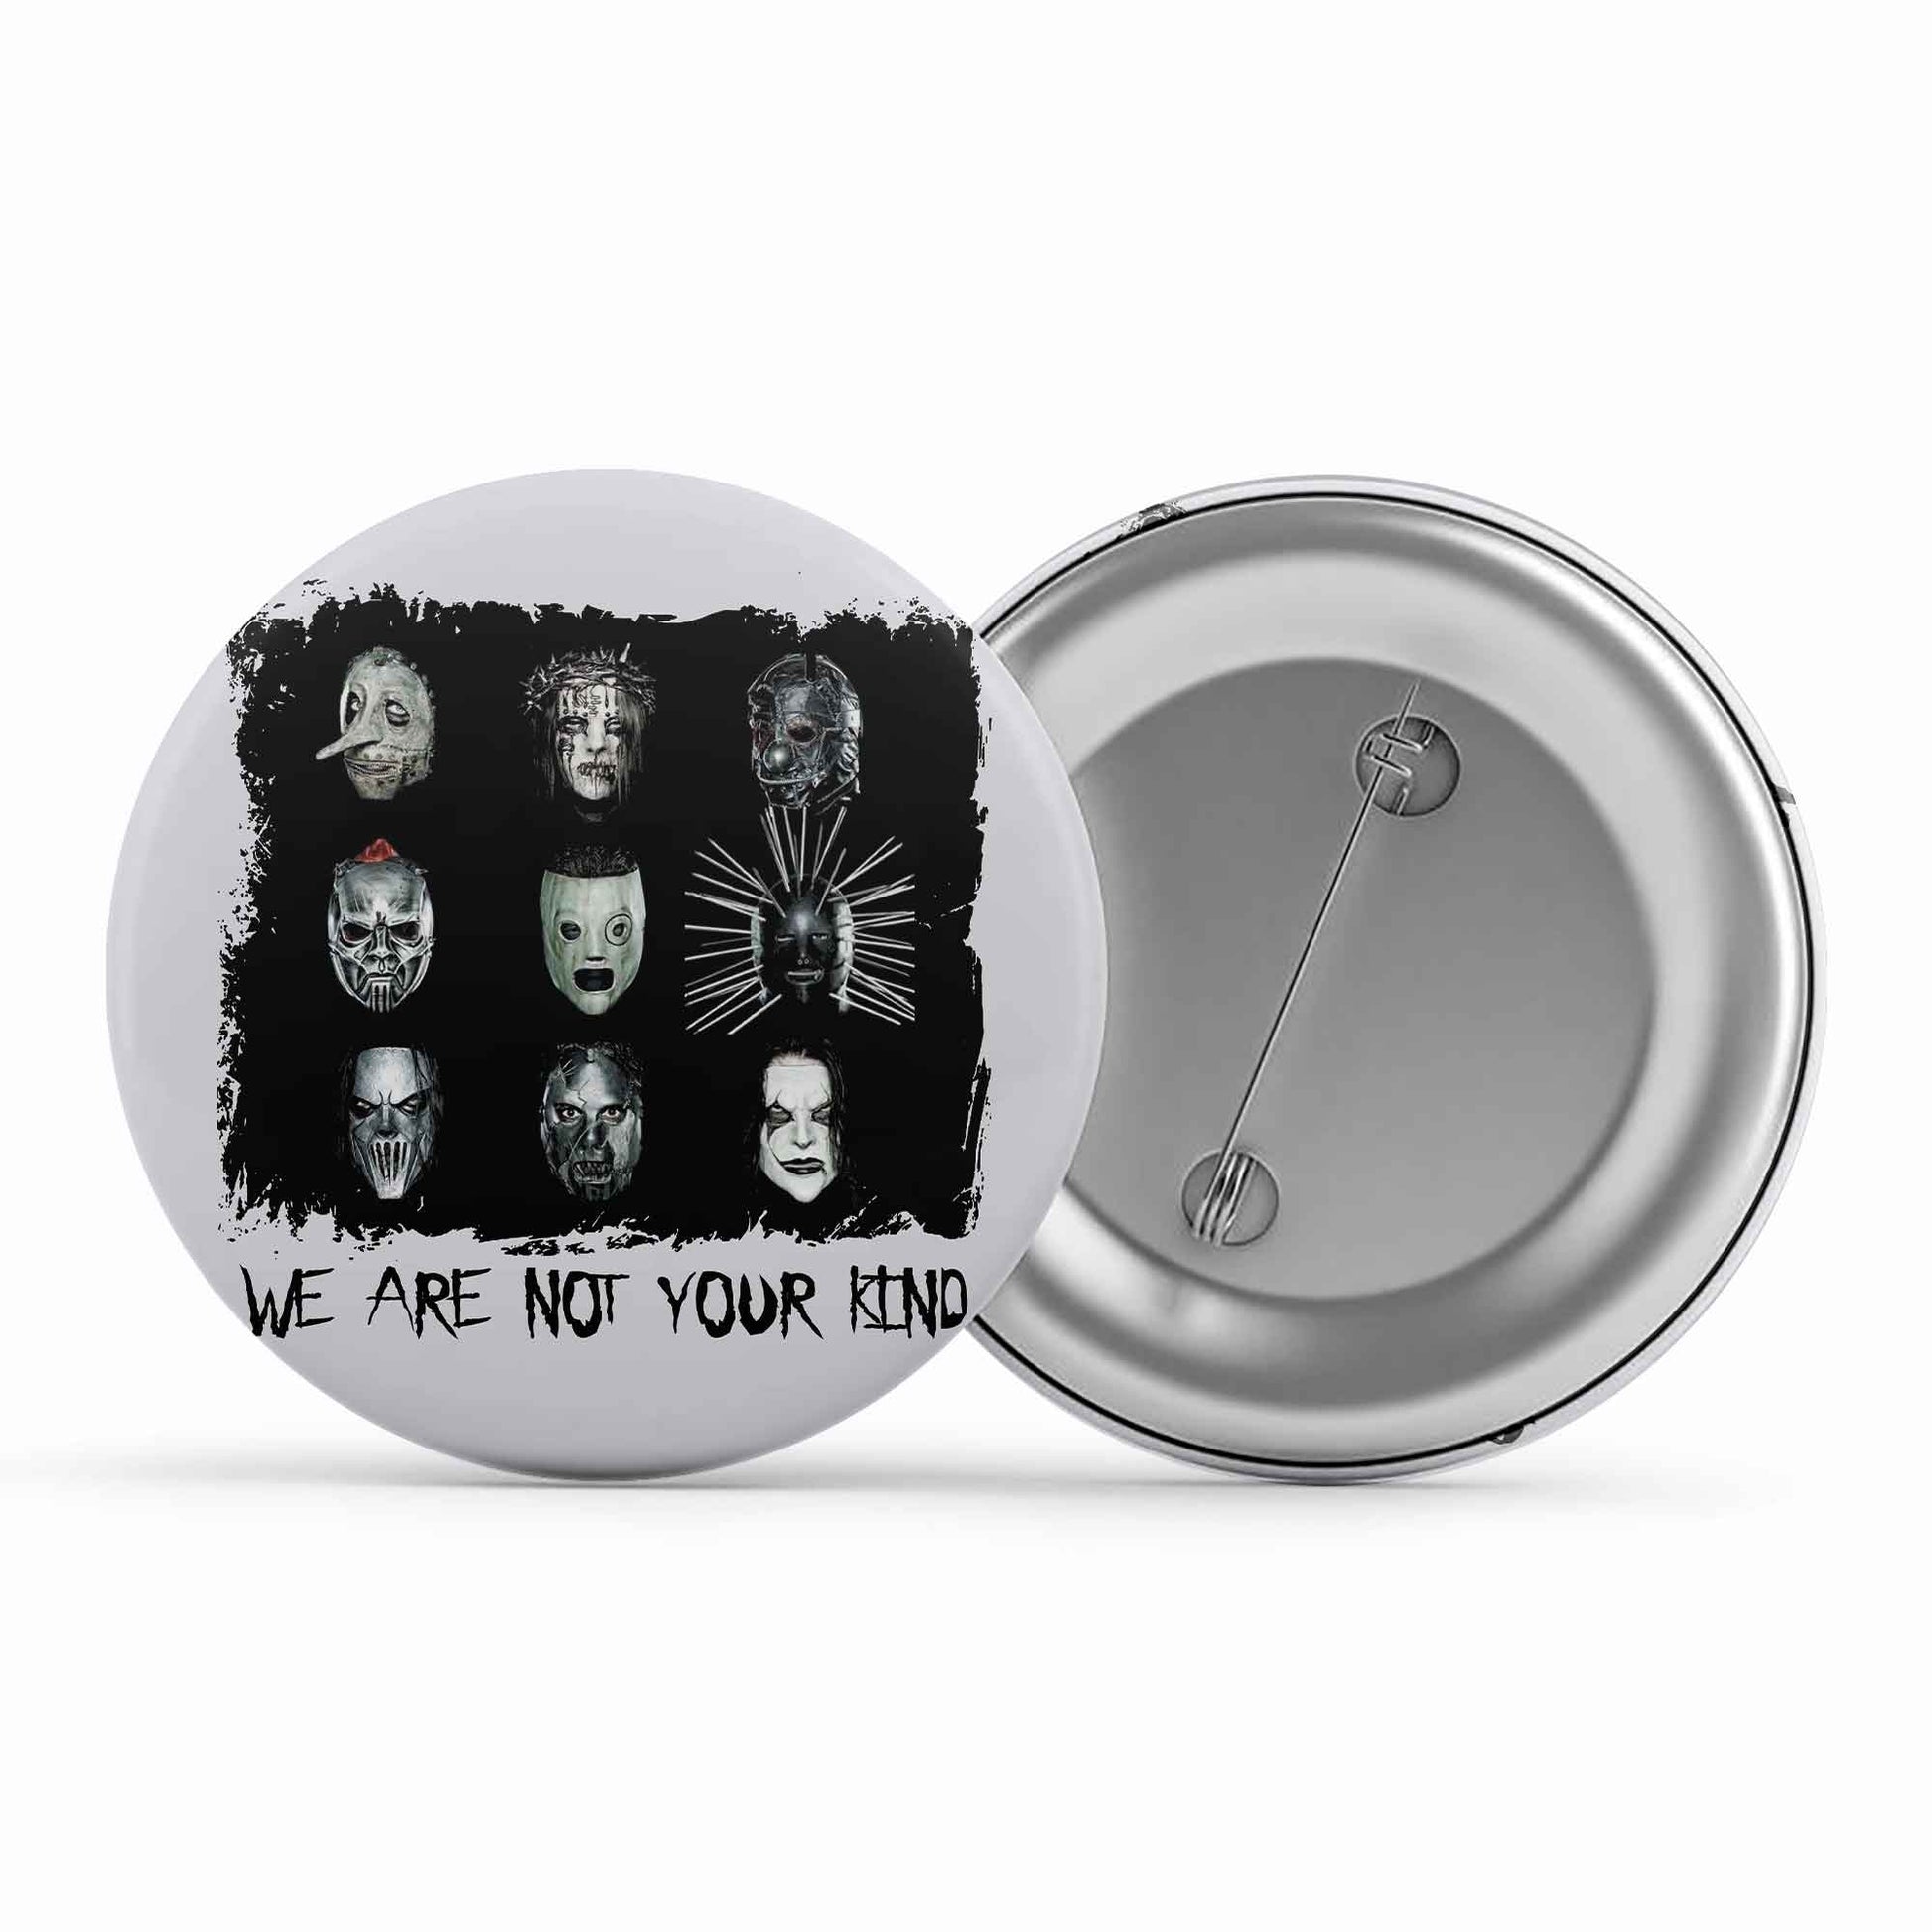 slipknot we are not your kind badge pin button music band buy online united states of america usa the banyan tee tbt men women girls boys unisex